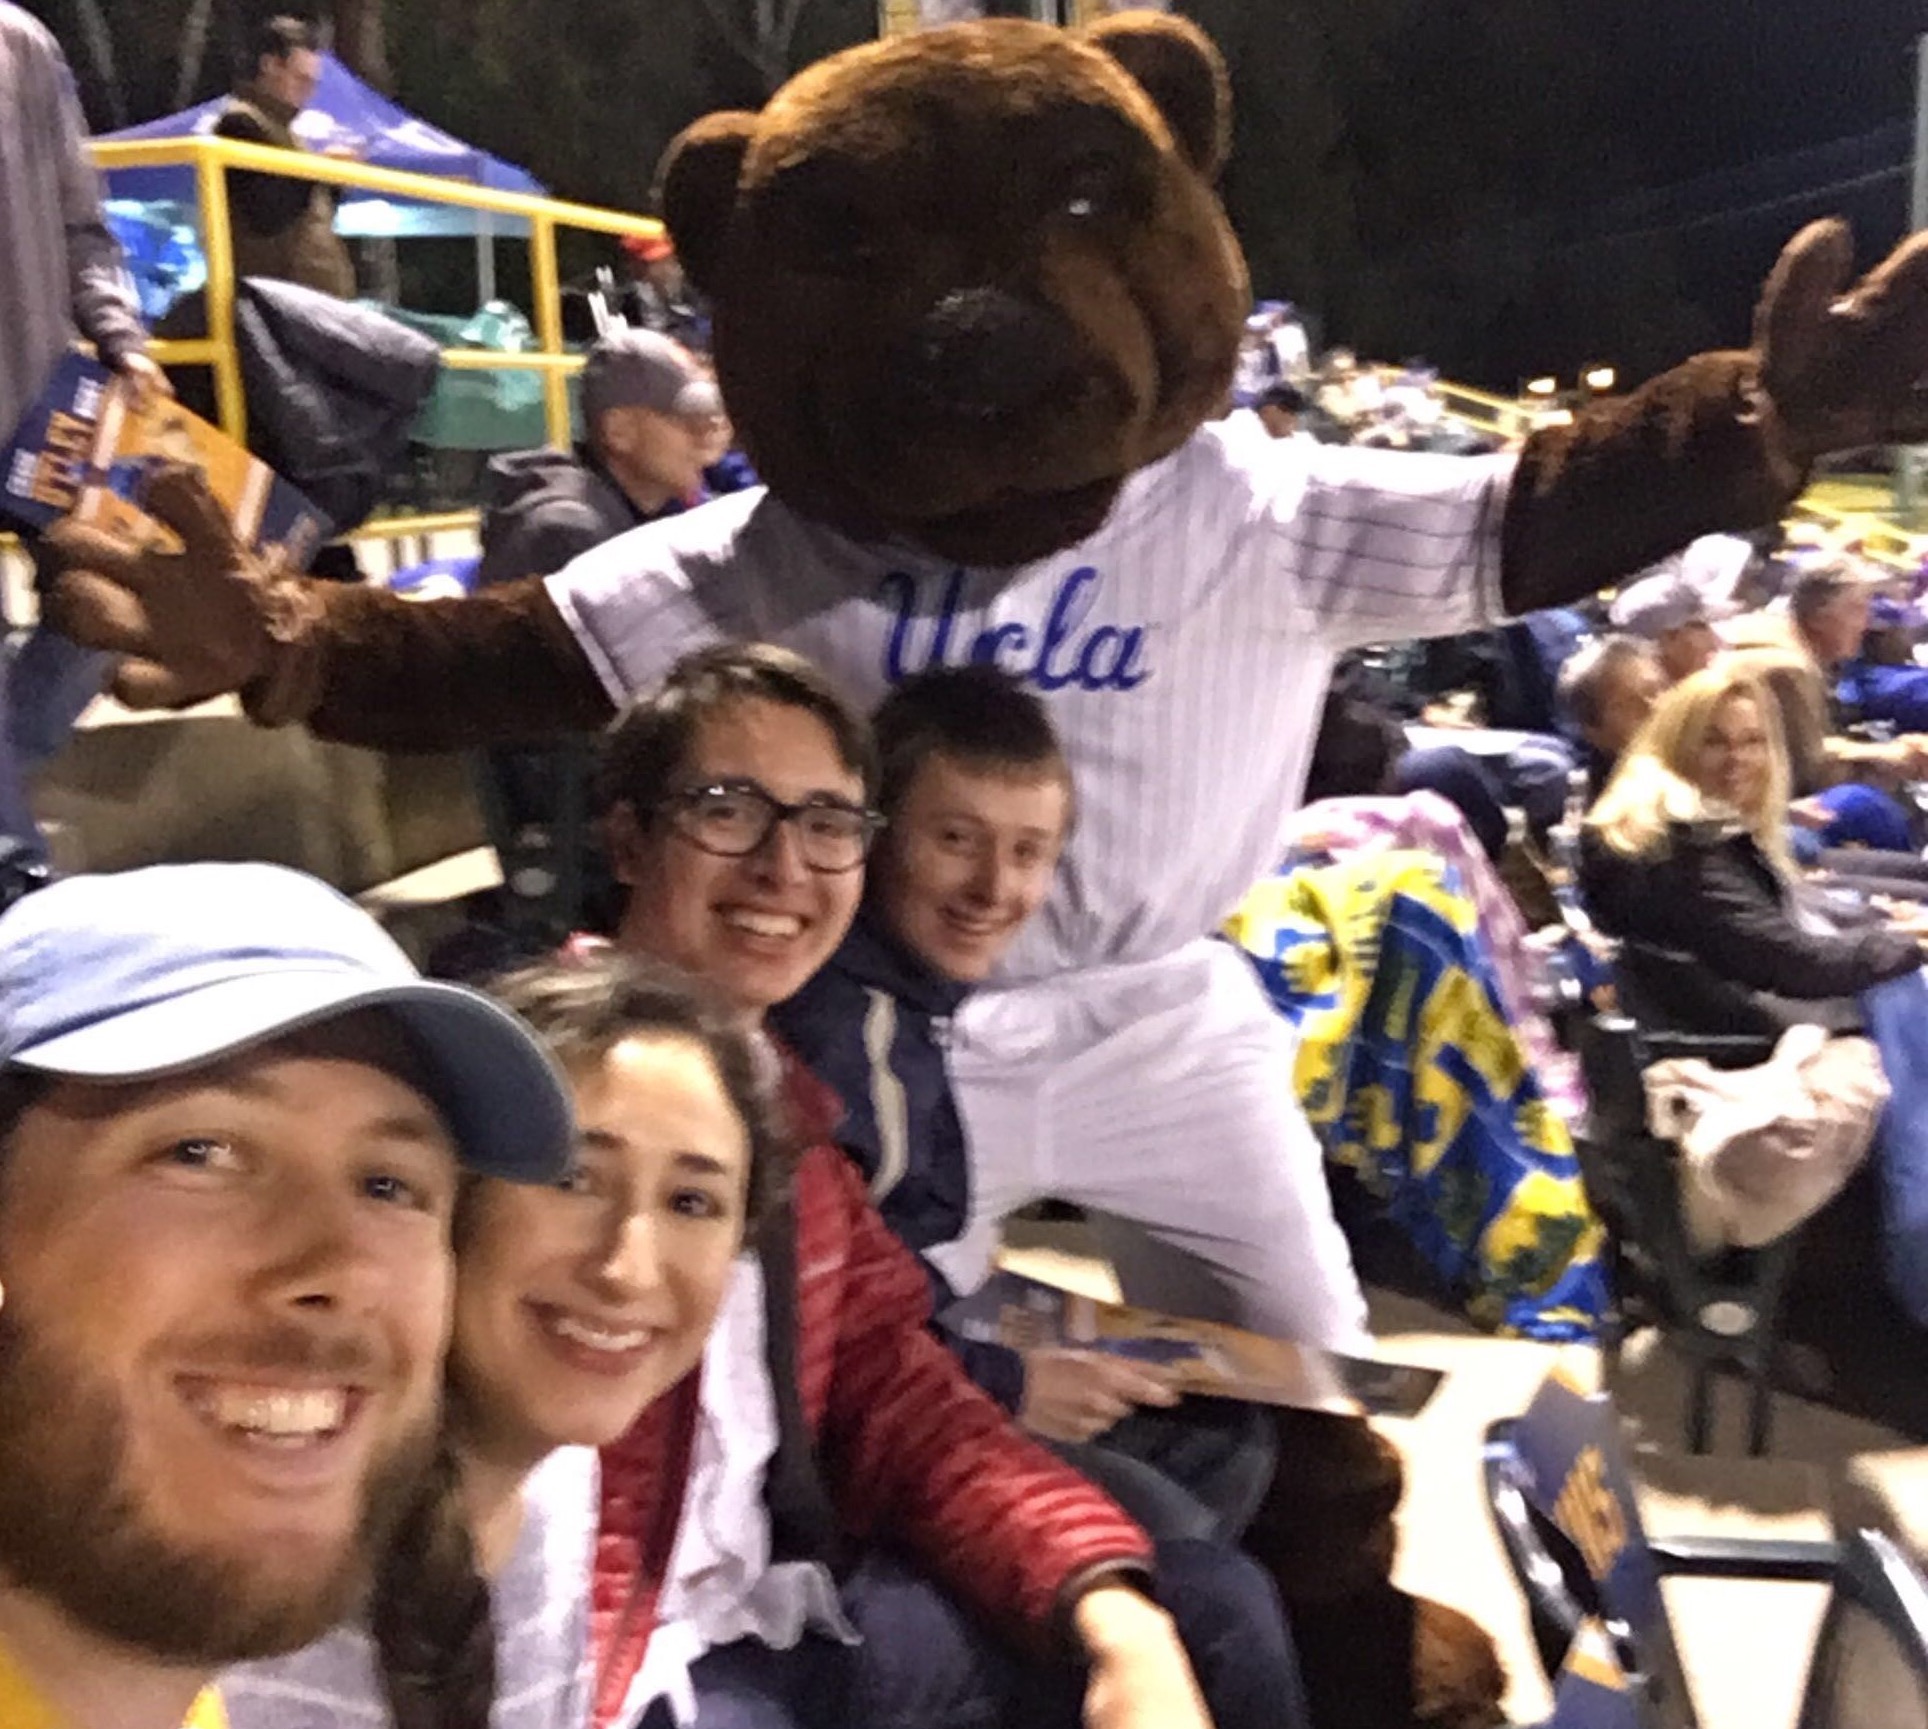 Picture of Will and friends at UCLA baseball game